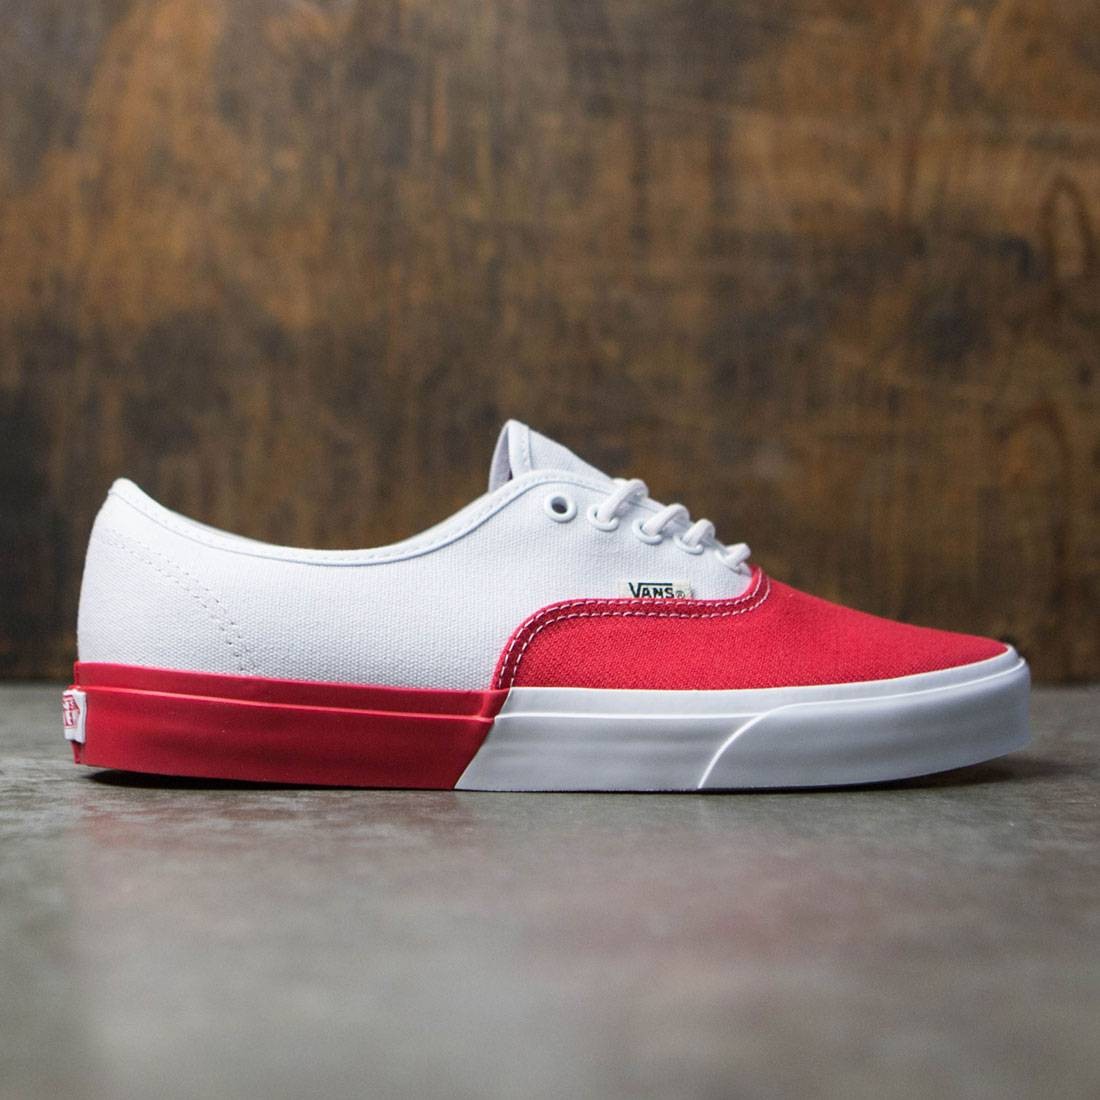 red and white vans